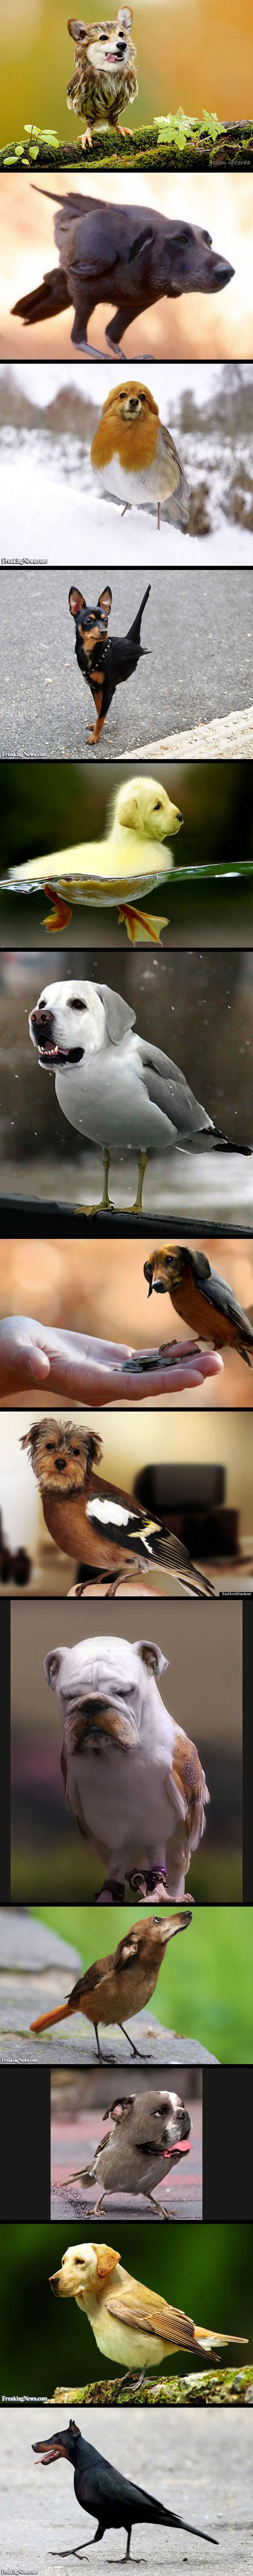 Dogs + Birds = This